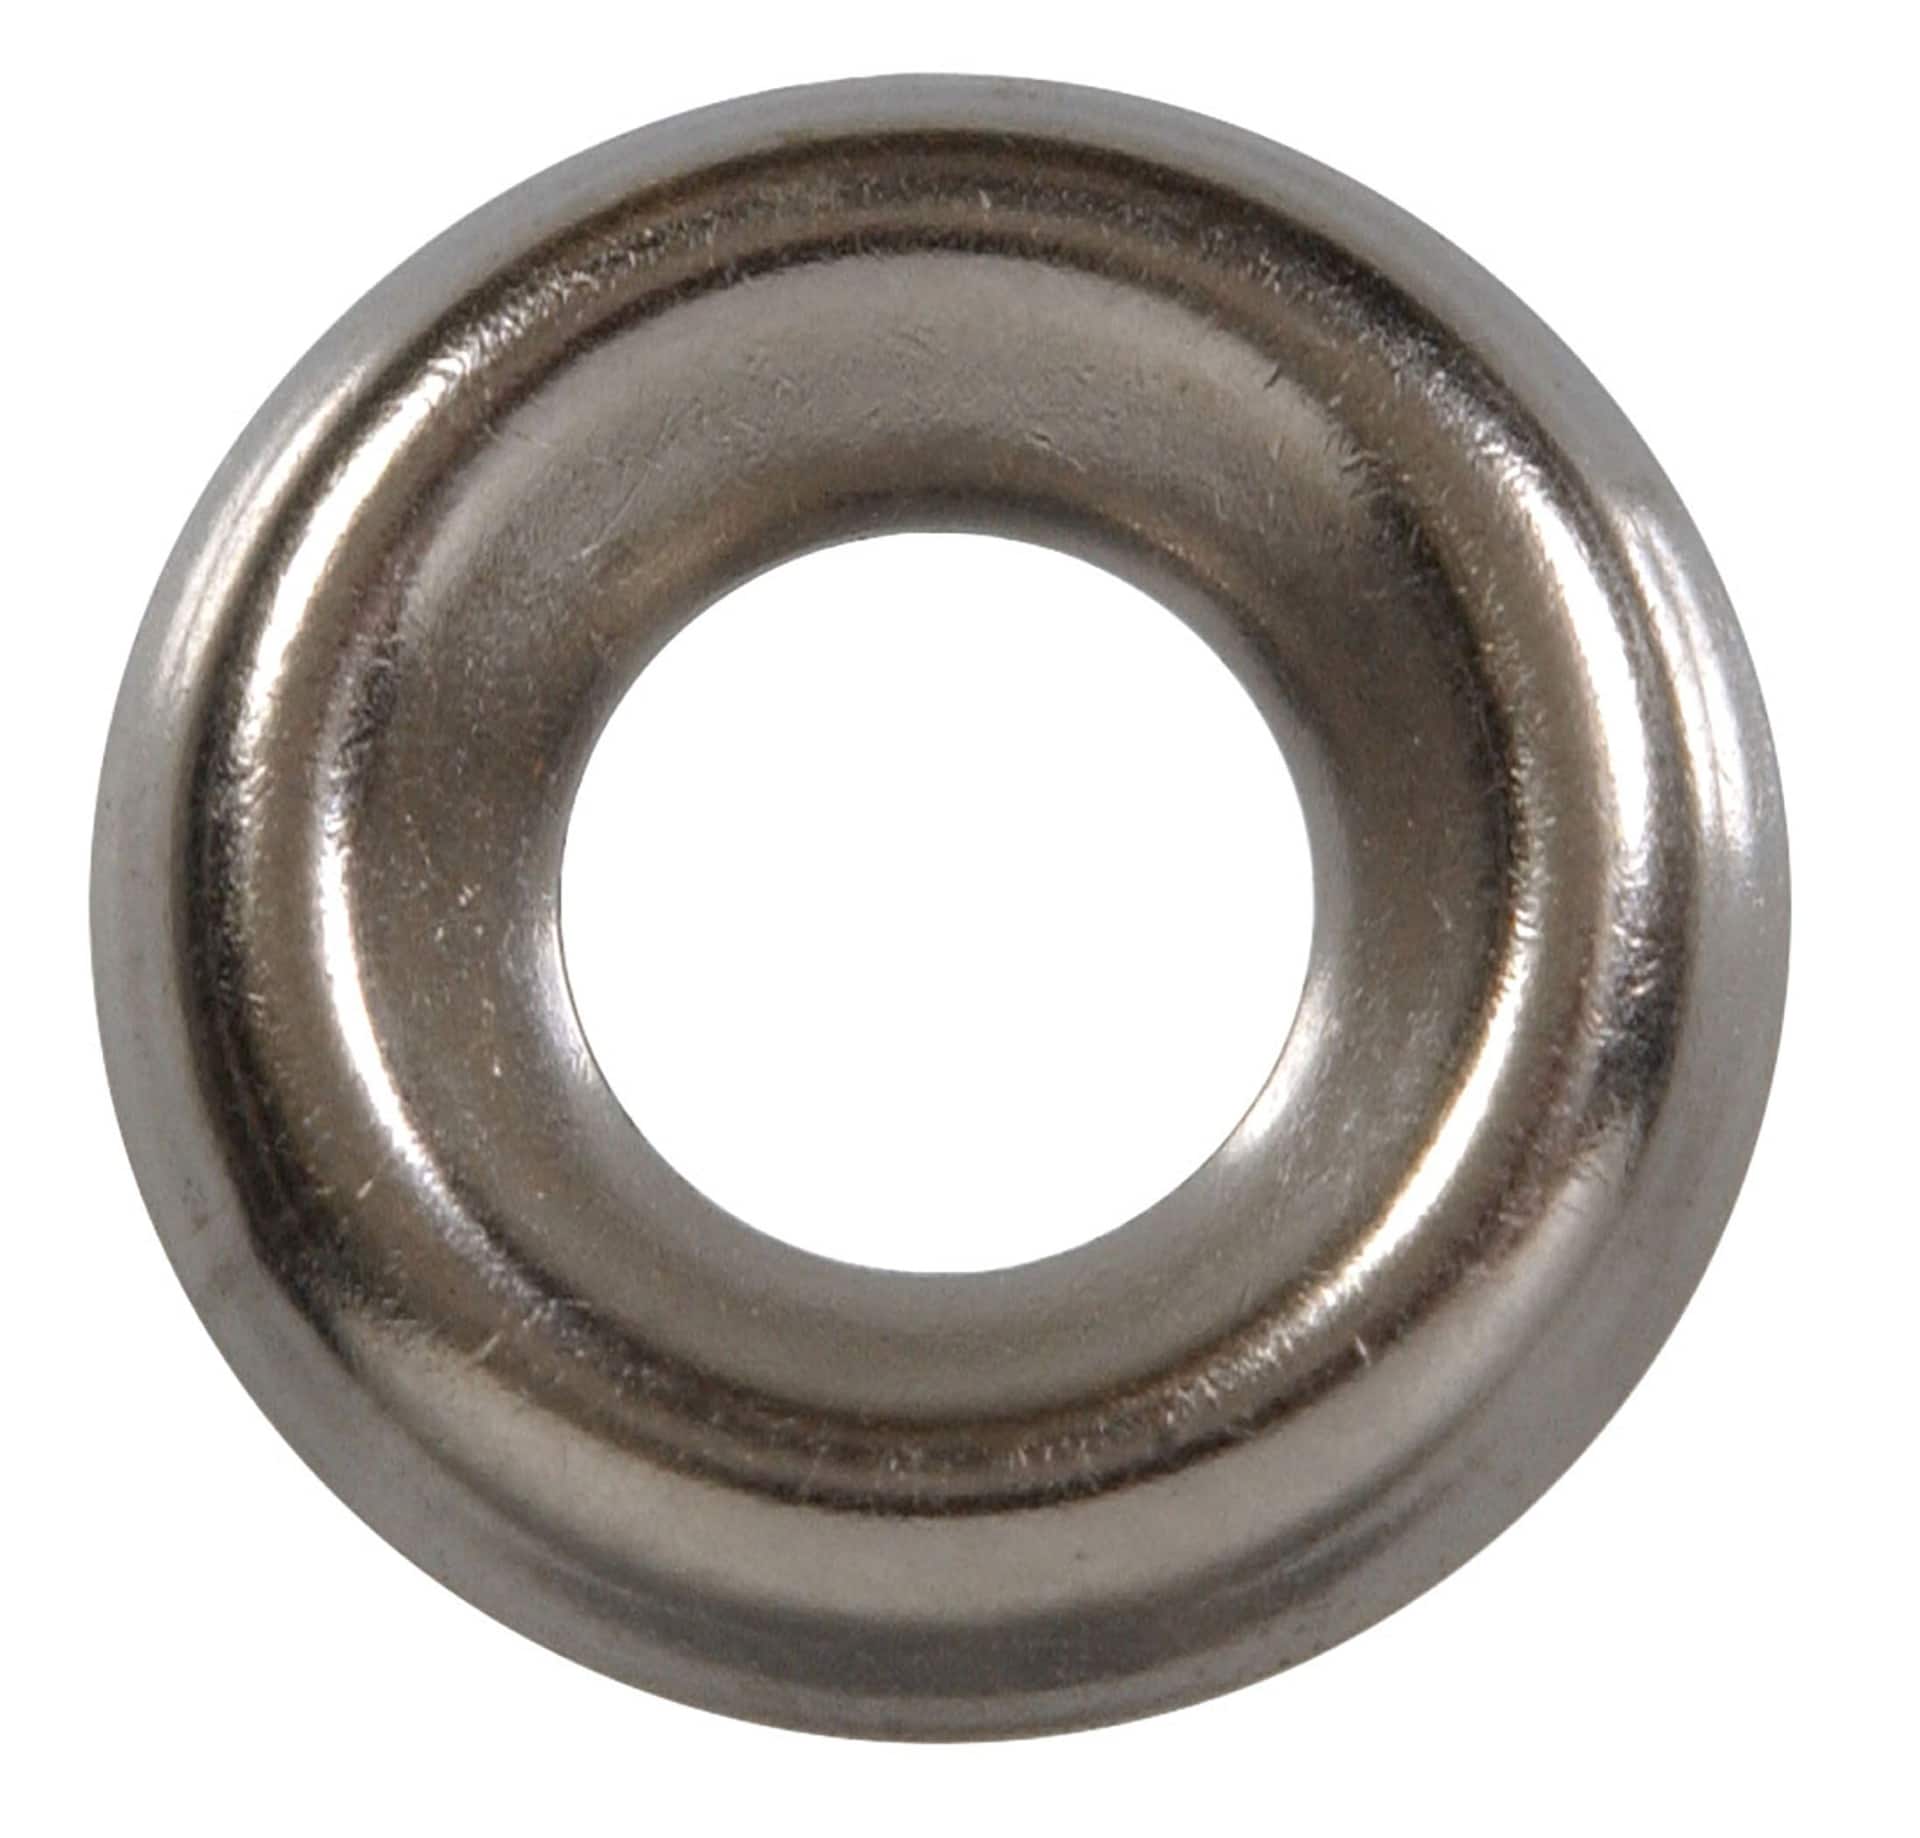 Hillman Flat Washers, For Decks and Fences, Brass-Finish, Assorted Sizes